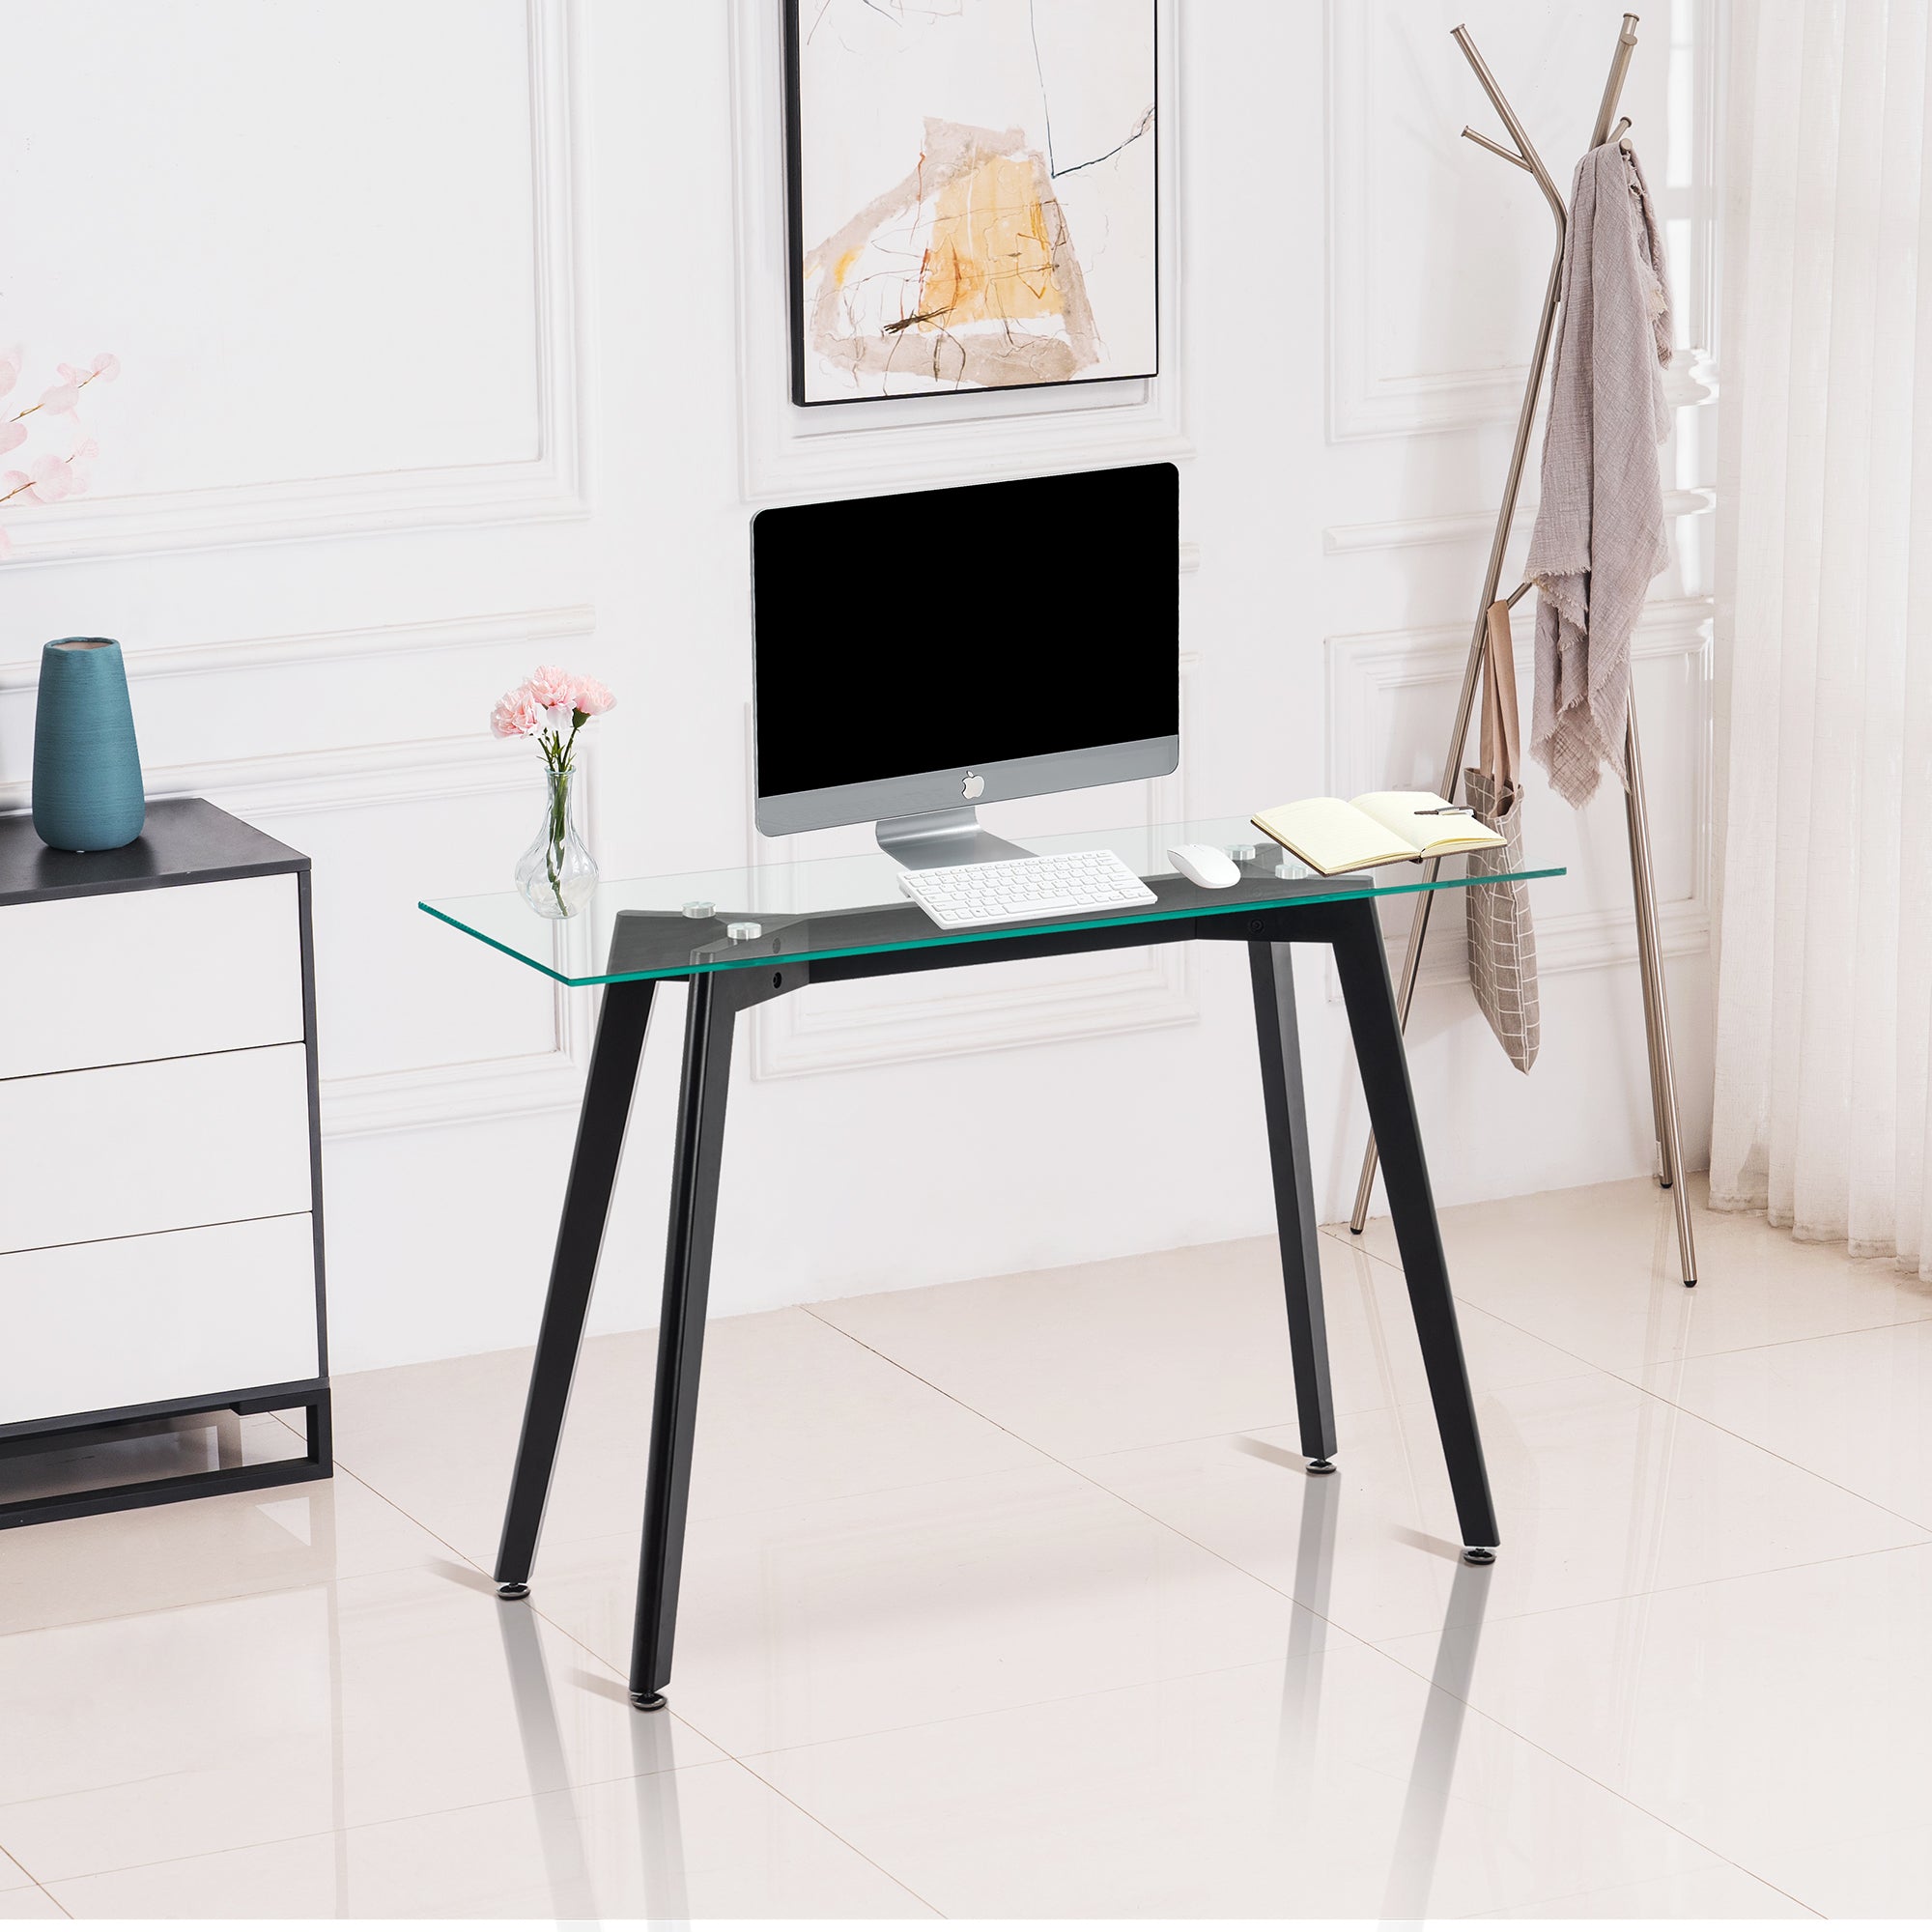 Ivinta Home Office Desk, 40-inch Simple Computer Desk, Small Writing Table for Saving Space